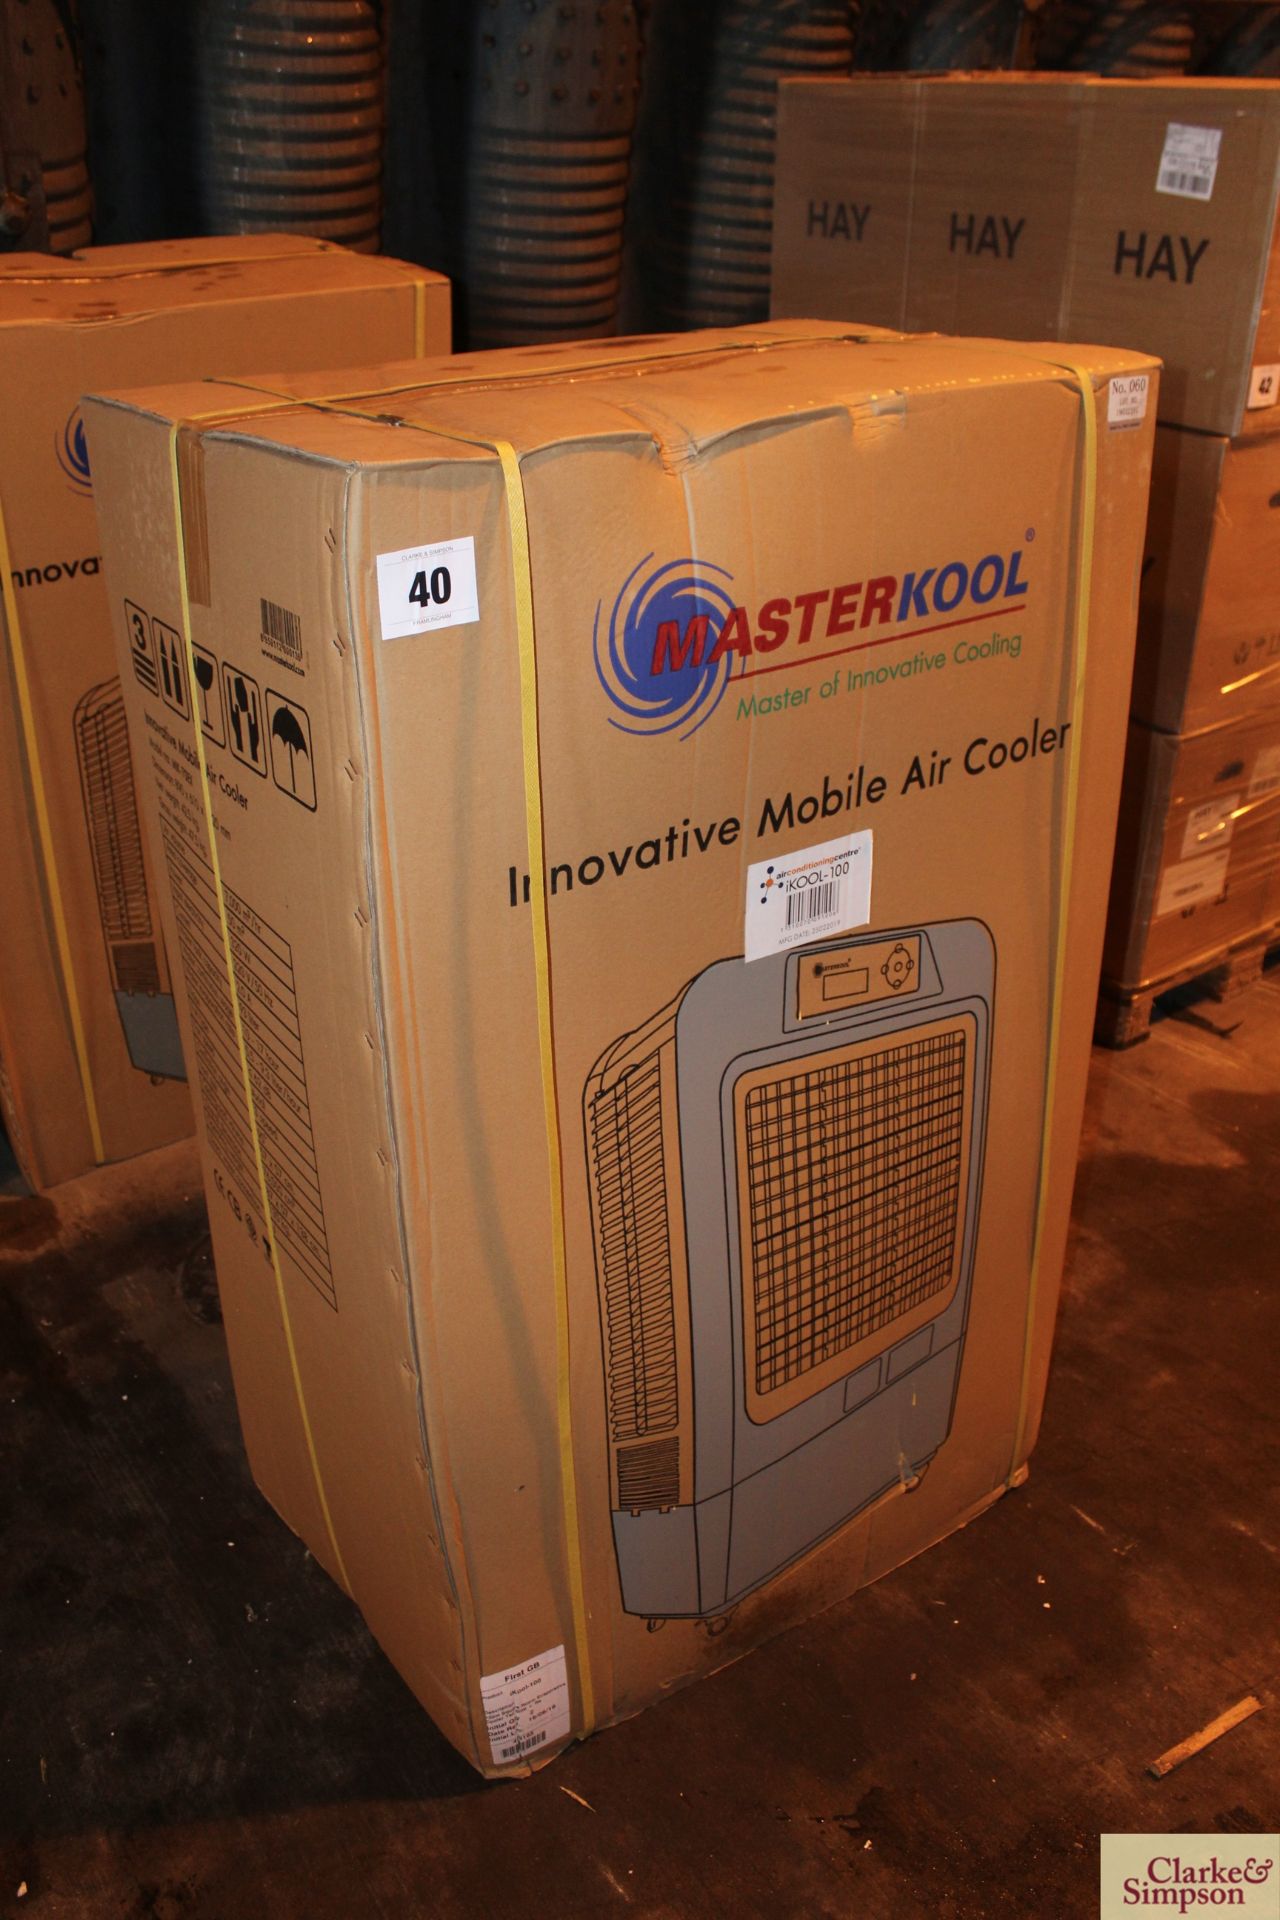 Boxed MasterKool iKool mobile air cooler. Model MIK-70EX. 2019. Click here for manufacturers